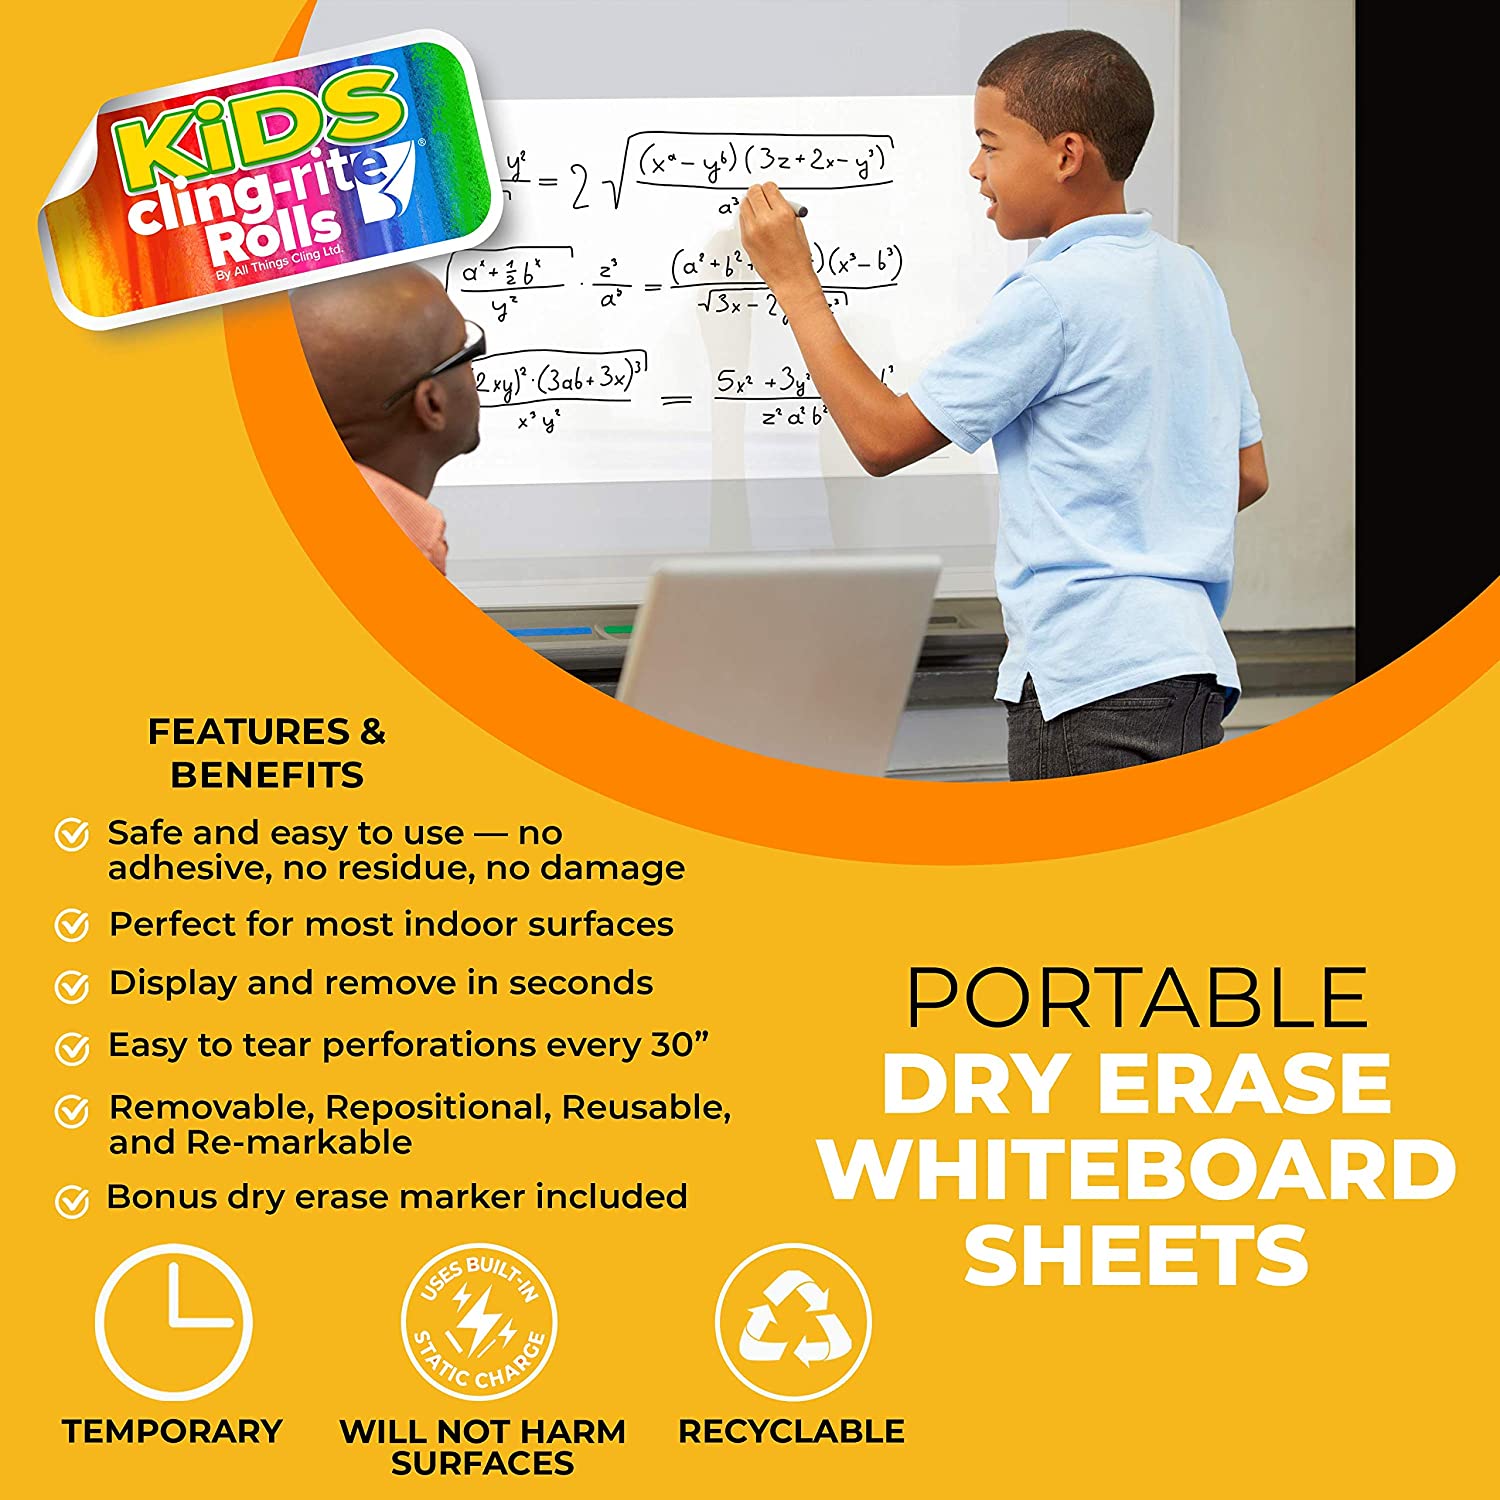 3x2 Refillable Whiteboard & Dry Erase Markers